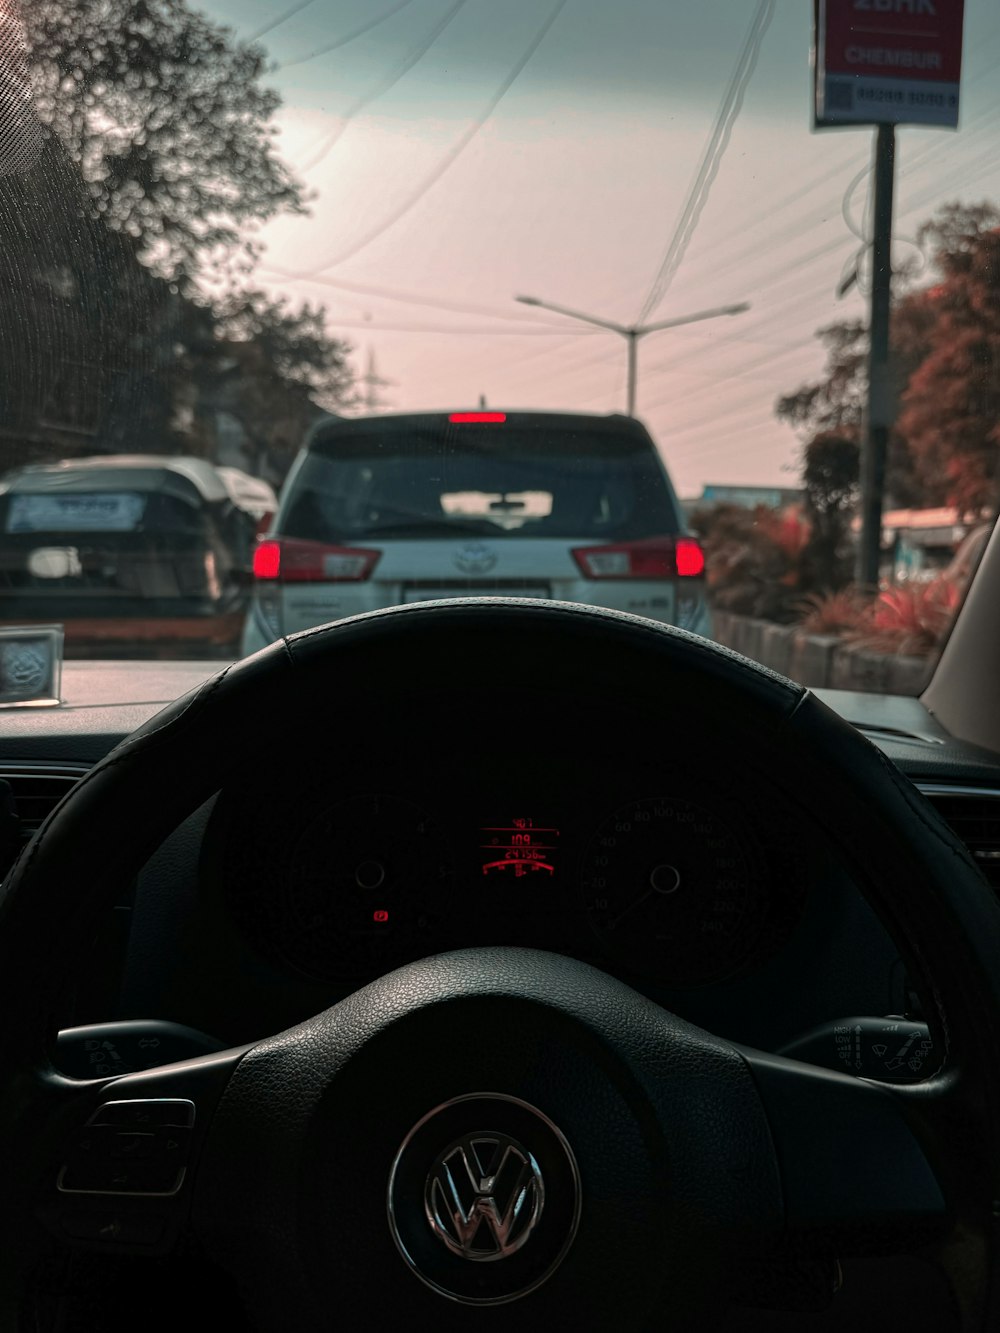 a view of a dashboard of a car from inside a vehicle